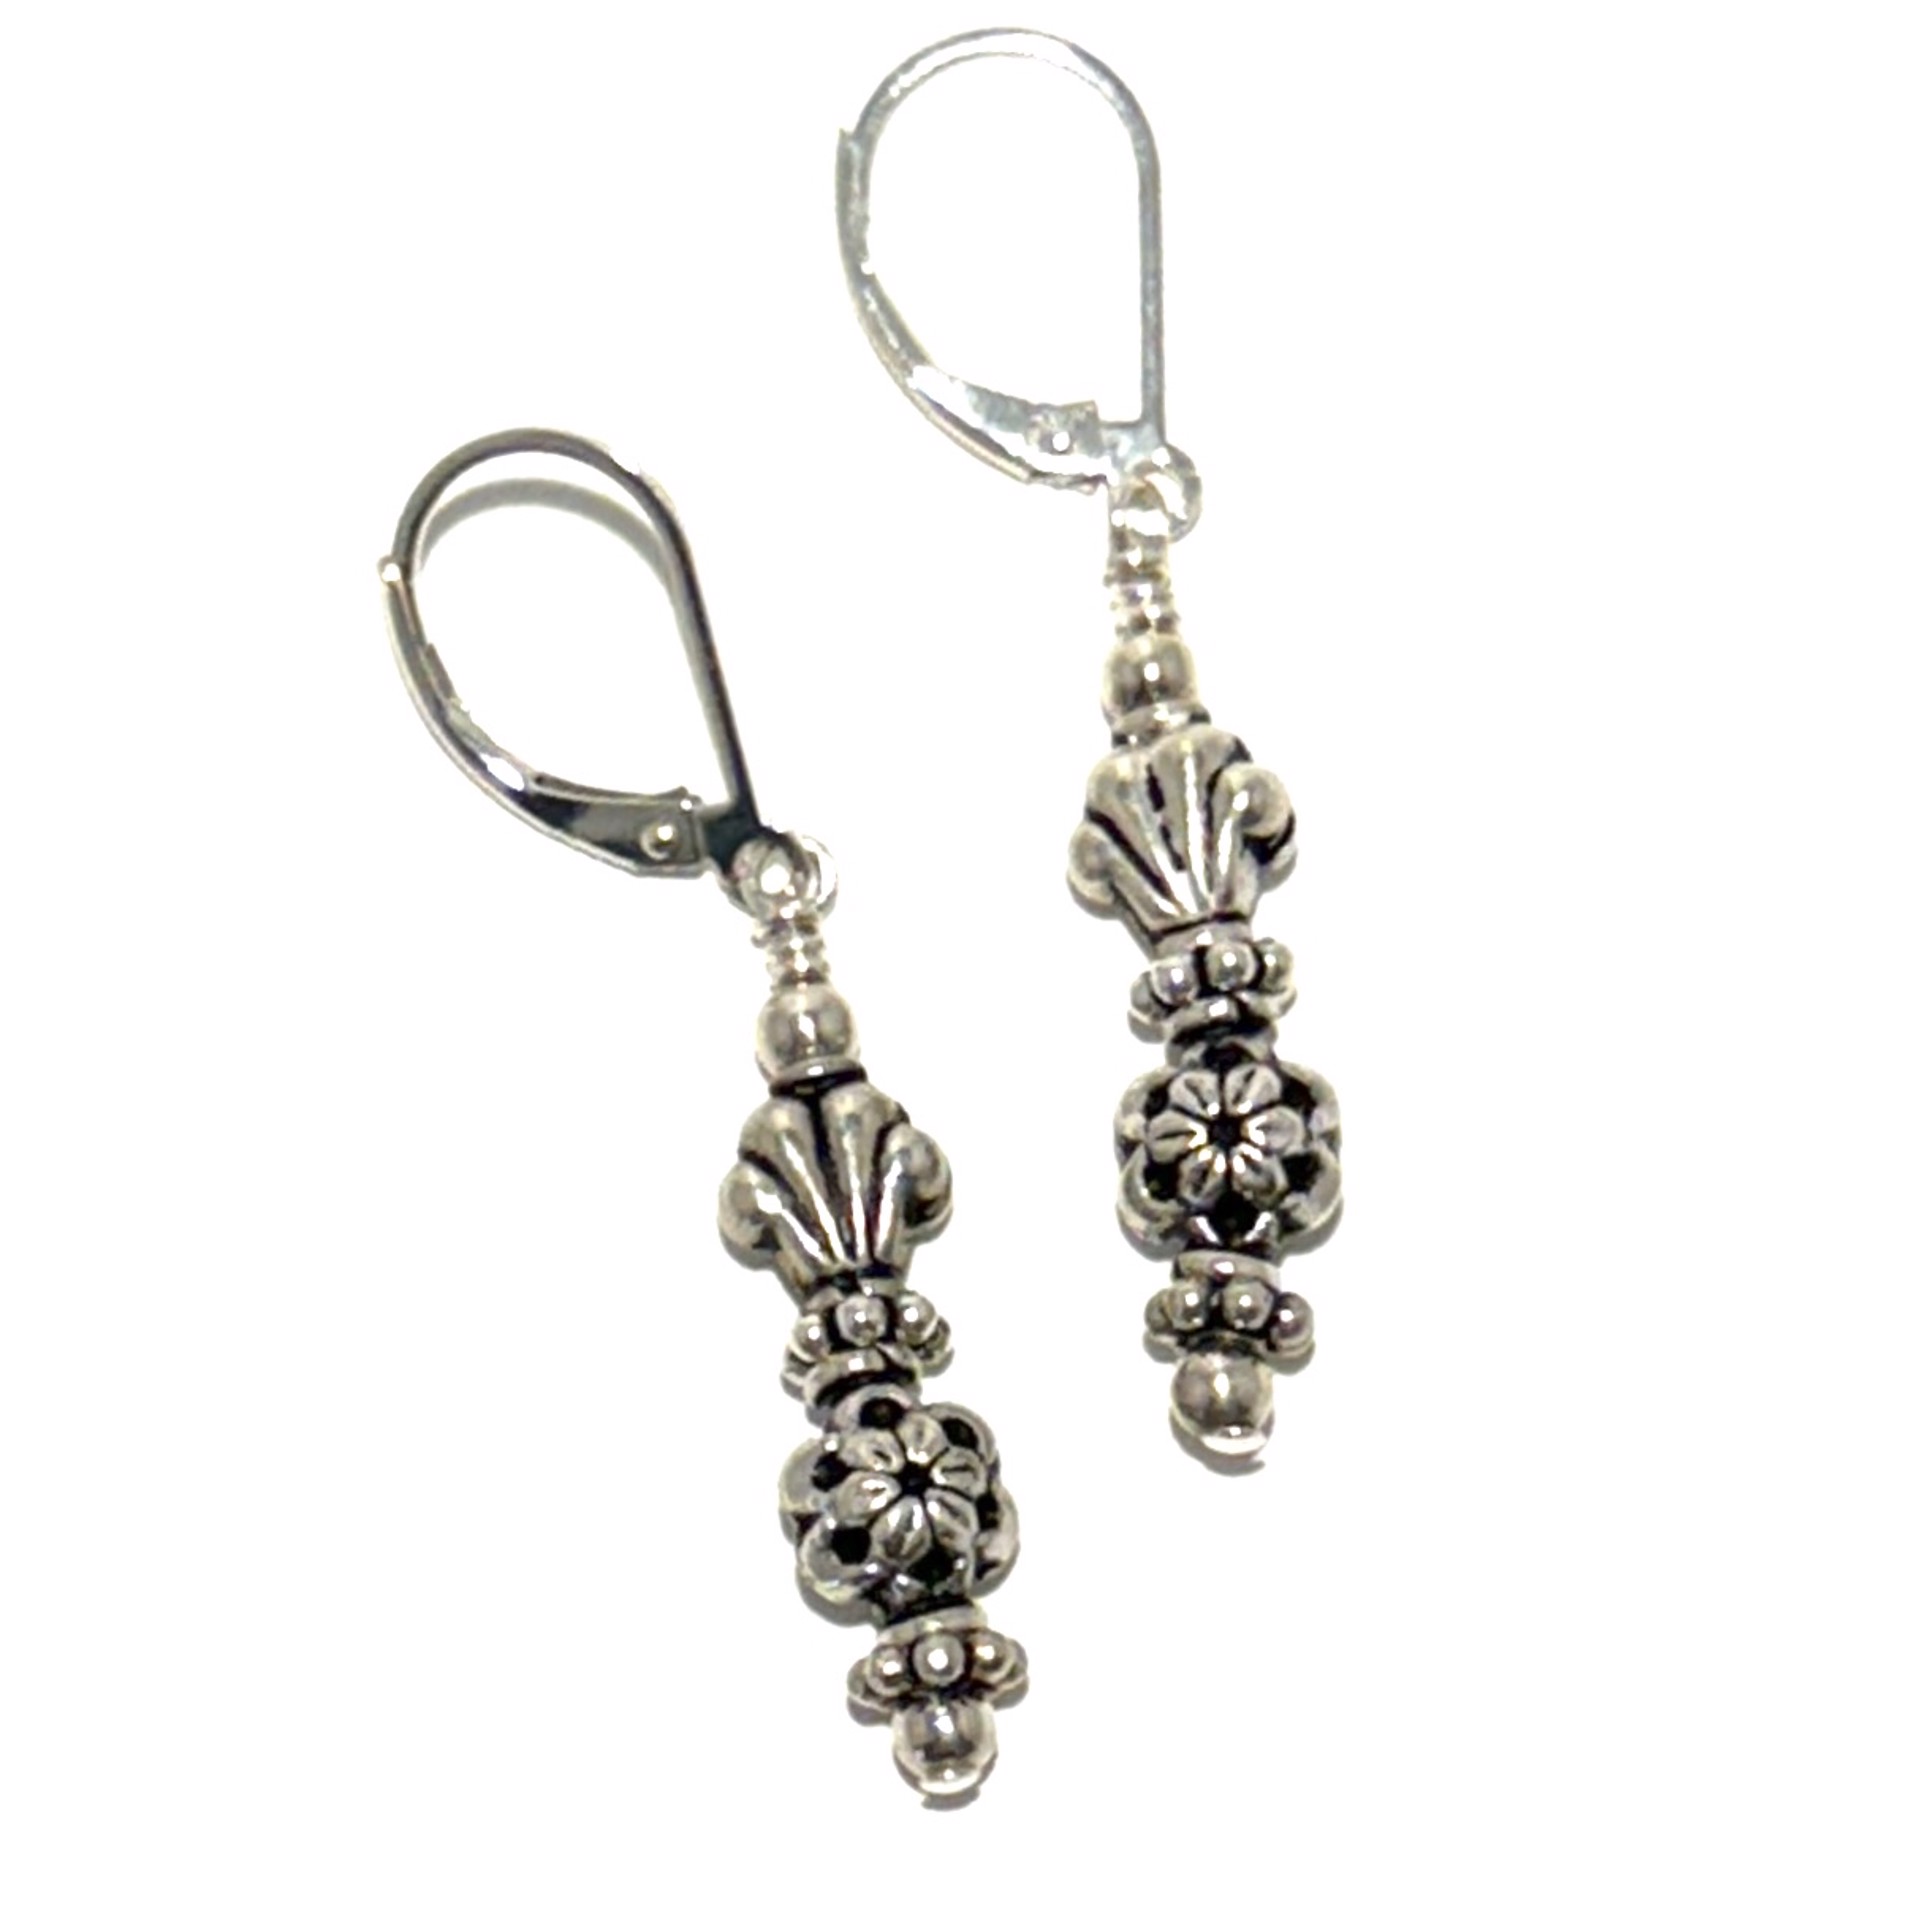 Stacked Sterling Bead  Earrings SHOSH23-50 by Shoshannah Weinisch